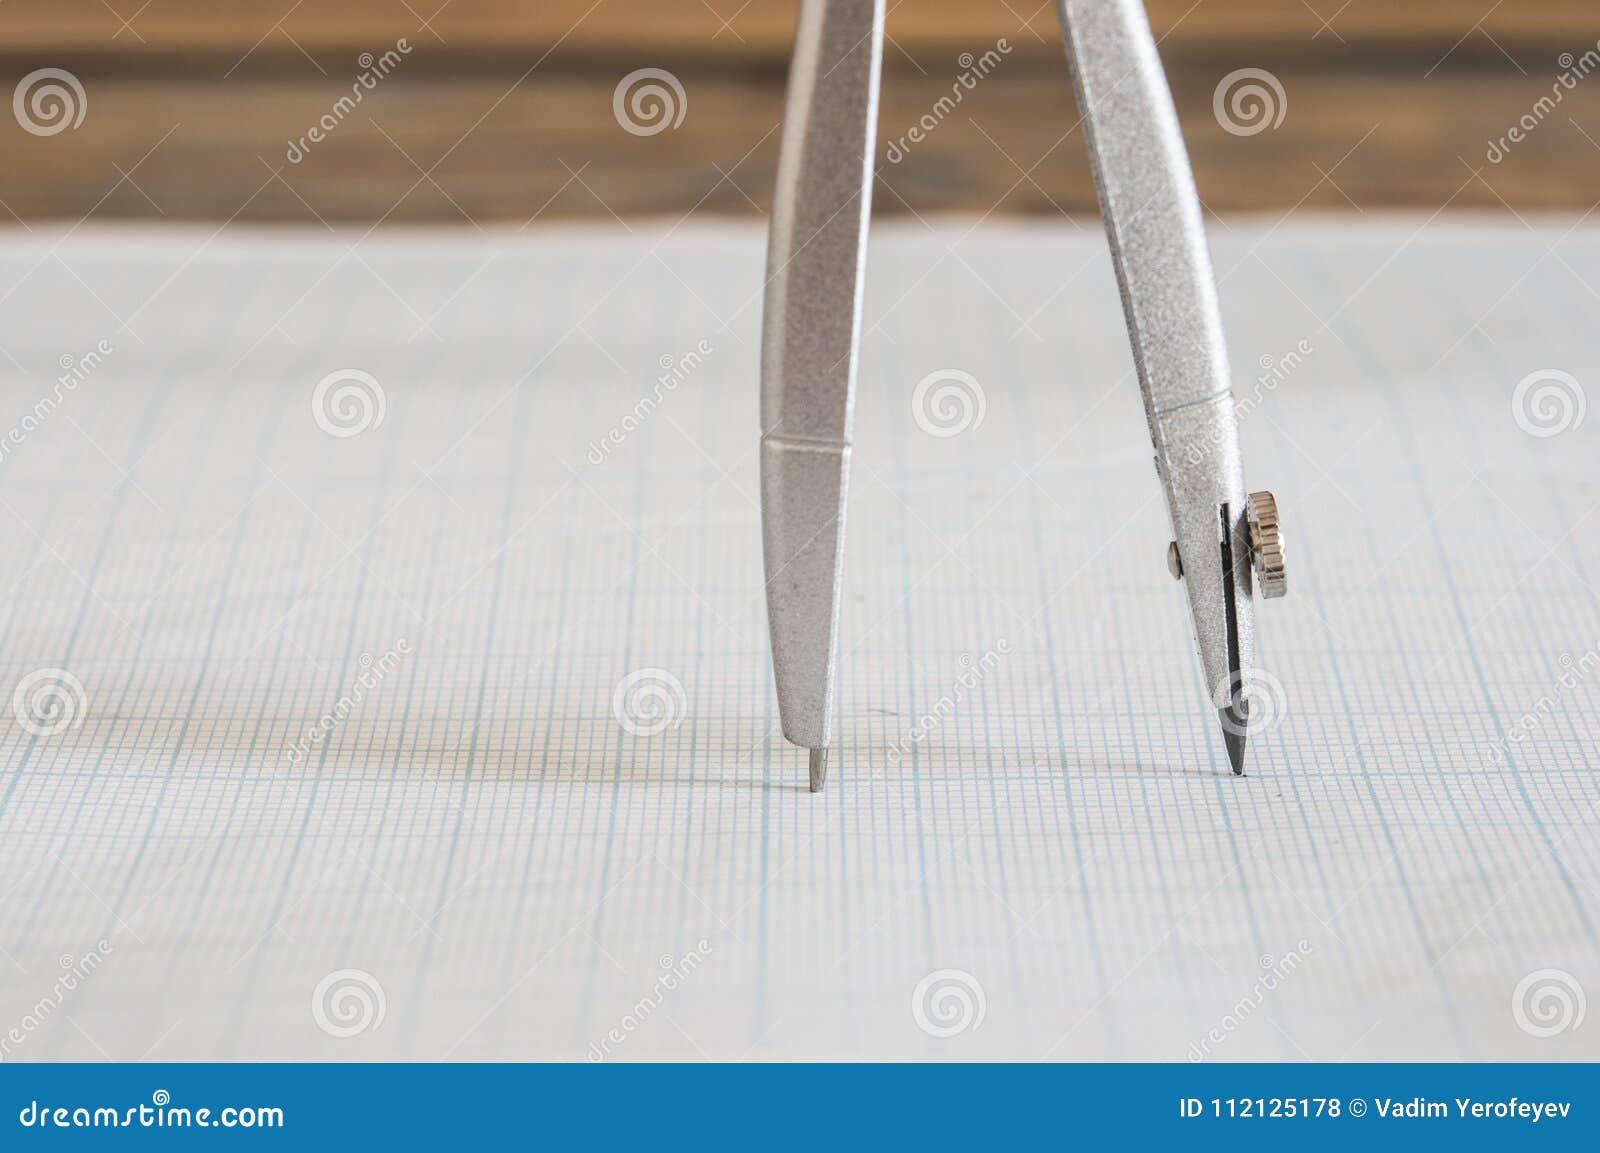 drawing tools background